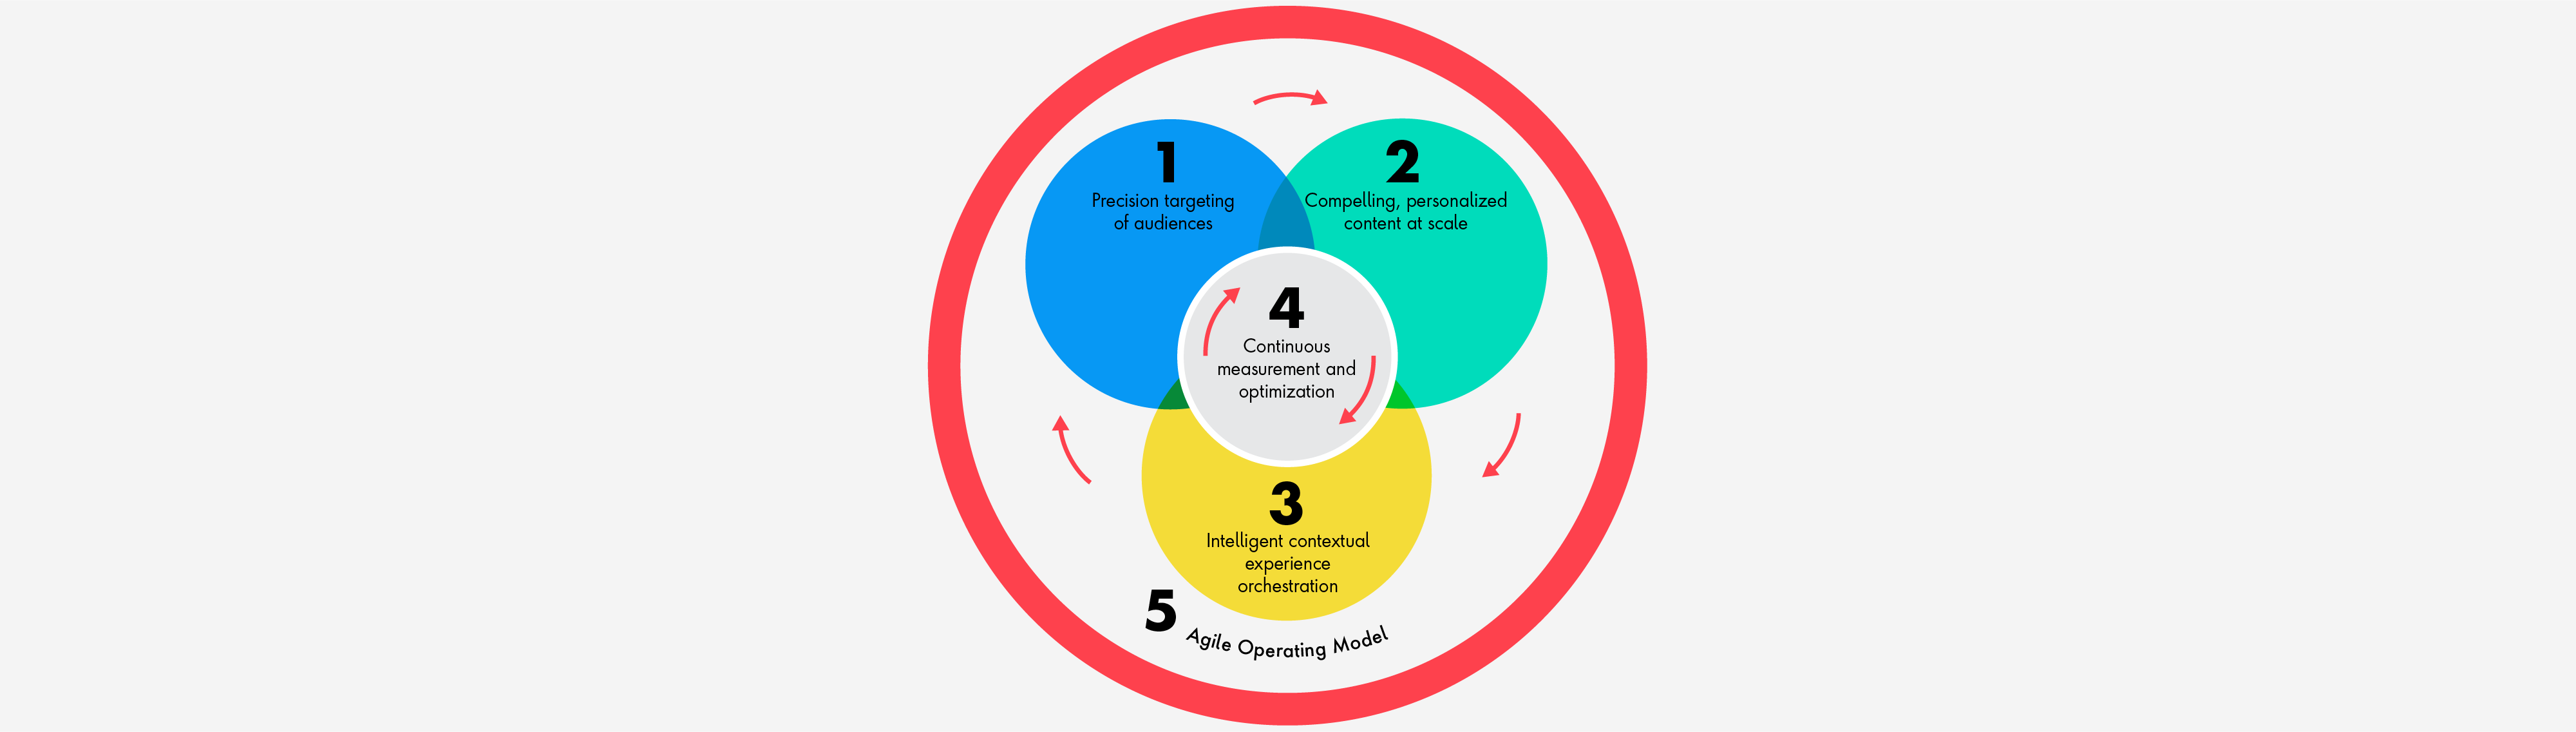 Graphic image of circles representing the 5 pillars to achieve personalization at scale